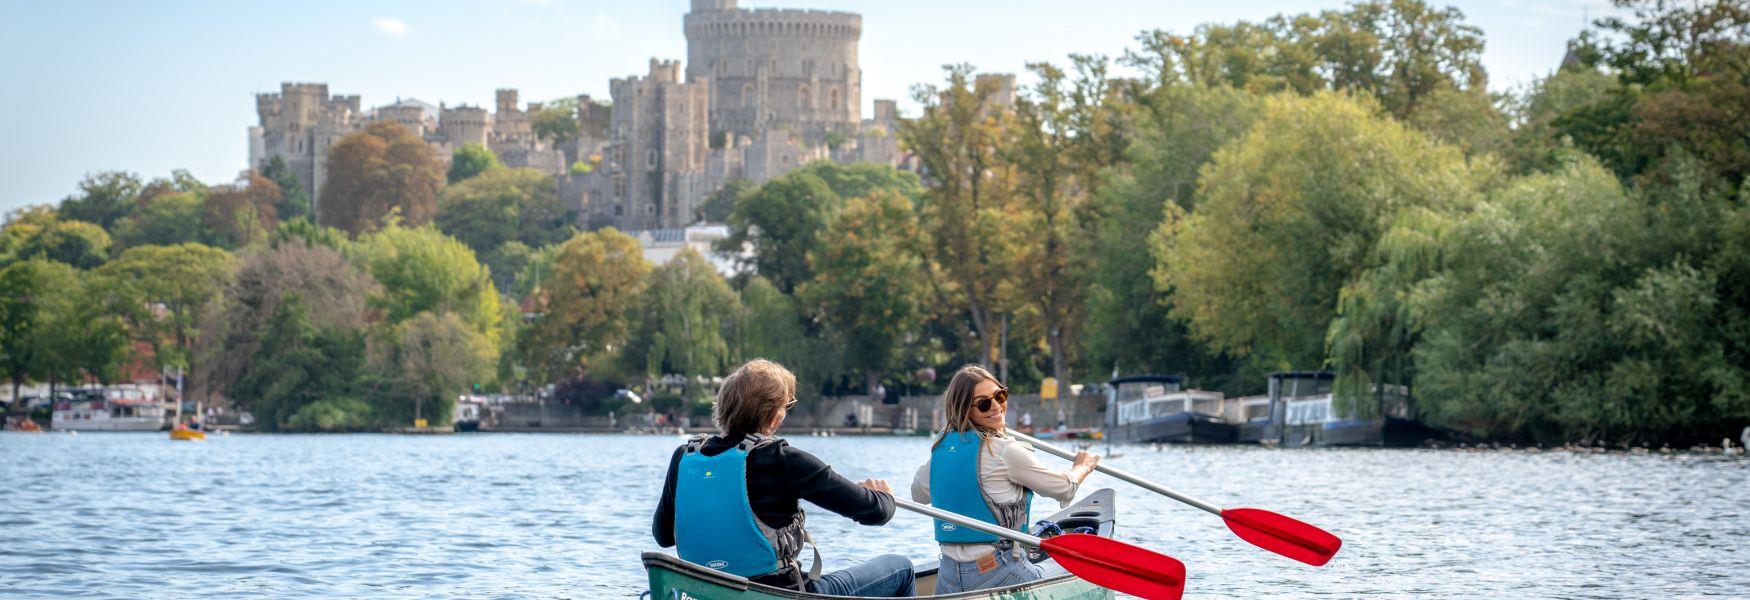 Couple canoeing on the River Thames with Windsor Castle in the distance